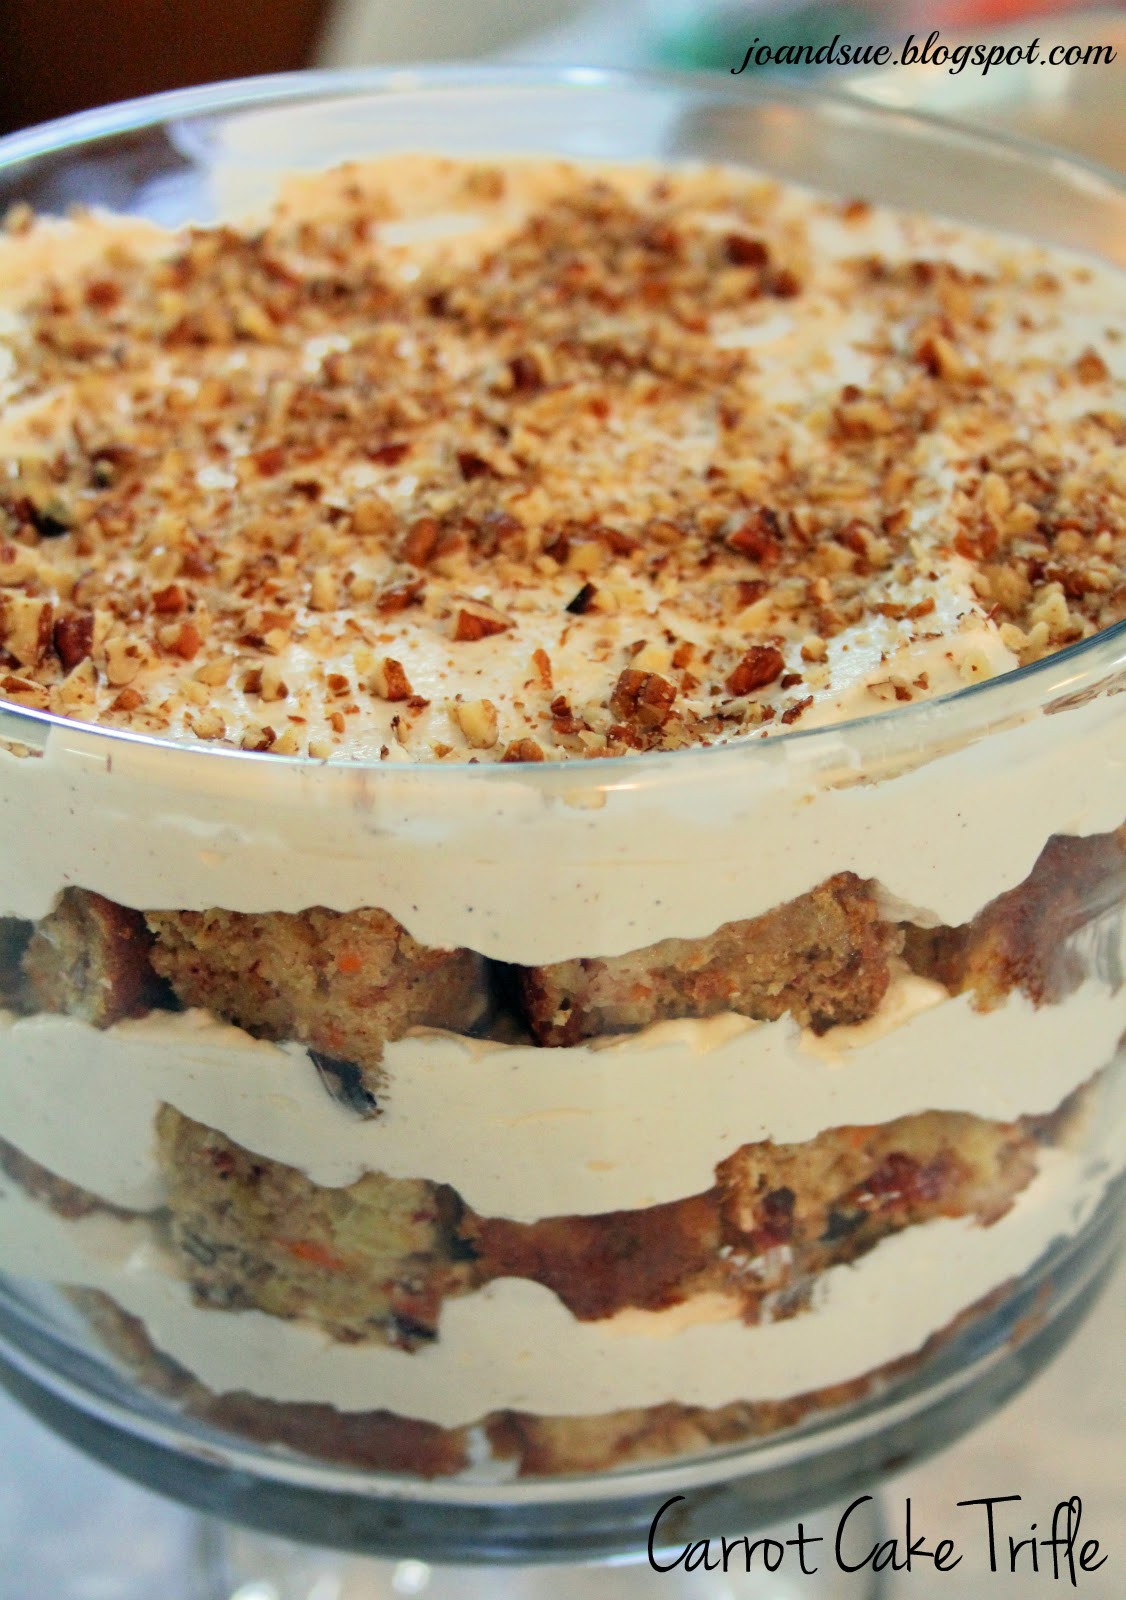 Carrot Cake Trifle
 Jo and Sue Carrot Cake Trifle